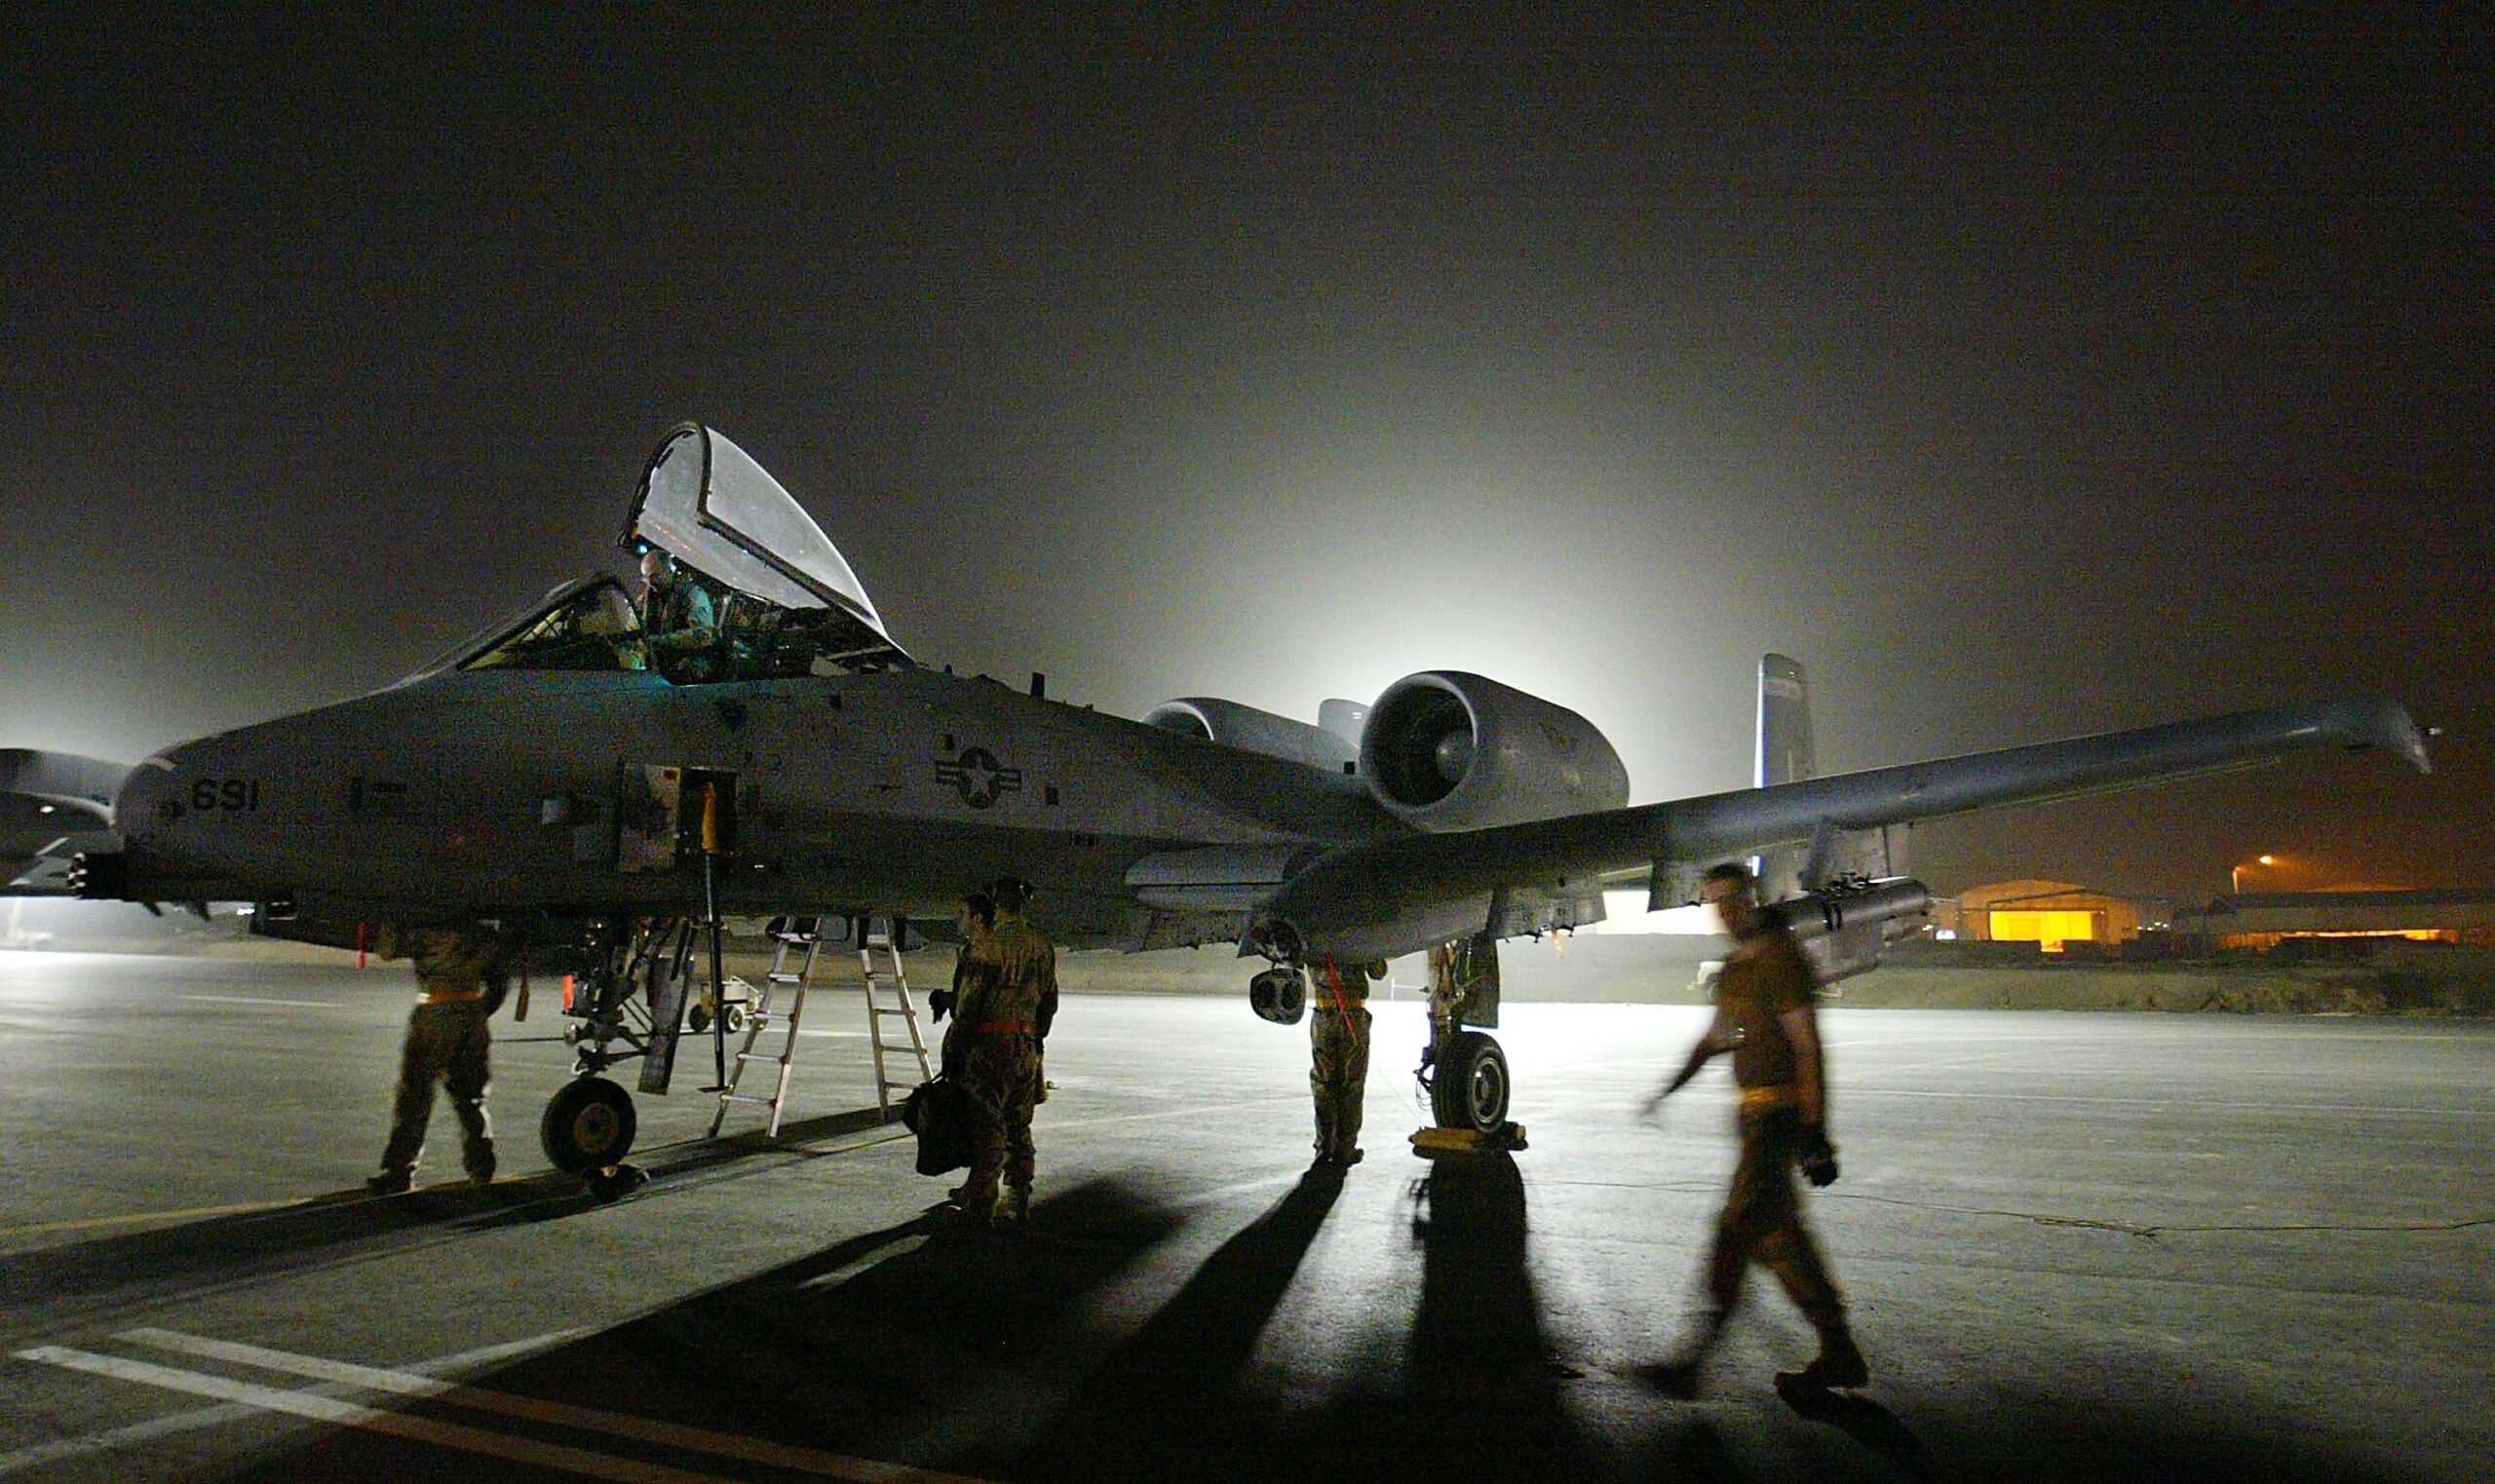 UNDISCLOSED AIRBASE, ARABIAN GULF - MARCH 19:  Air Force maintenance personnel go through pre-flight checks on an A-10 Warthog tank killer plane as work goes on through the night March 19,2003 at an airbase in the Arabian Gulf. More than 250,000 troops, a naval armada and an estimated 1,000 combat aircraft are in the region, ready to strike Iraq when the U.S. President George W. Bush gives the word.  (Photo by Paula Bronstein/Getty Images)